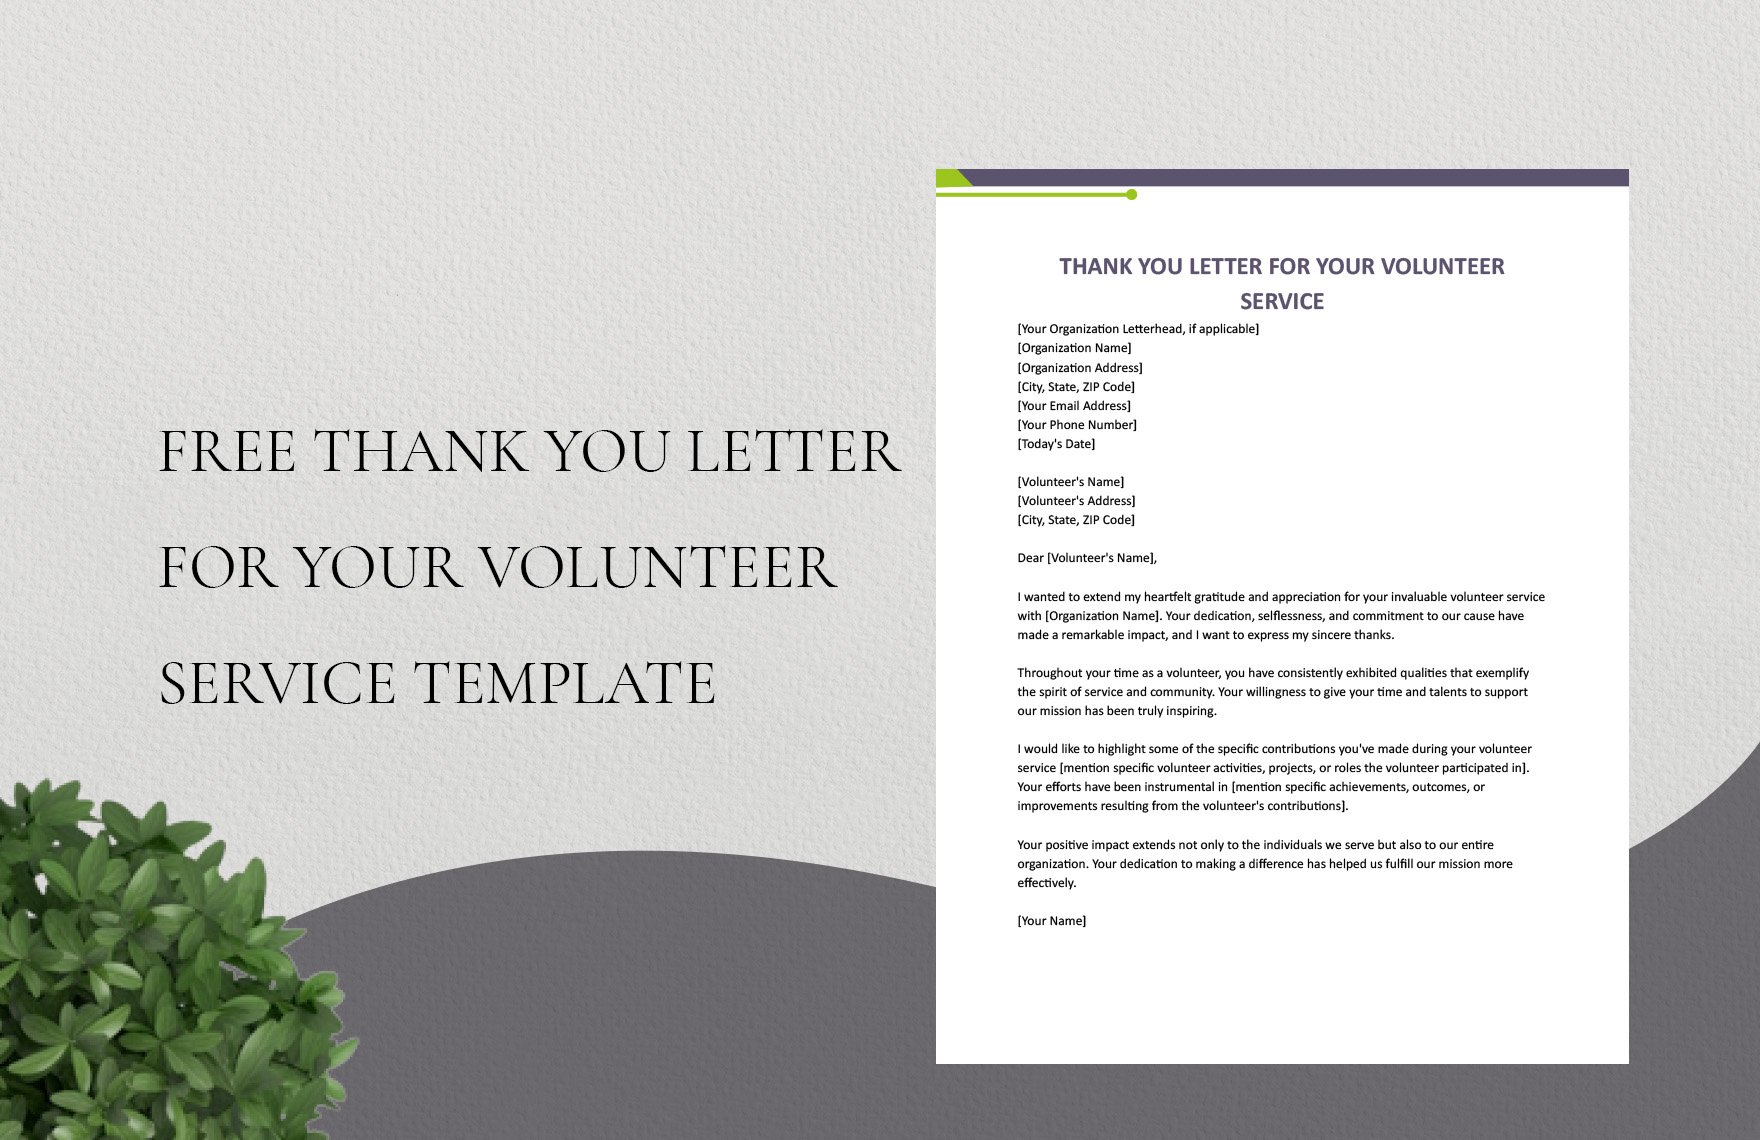 Thank You Letter For Your Volunteer Service Template